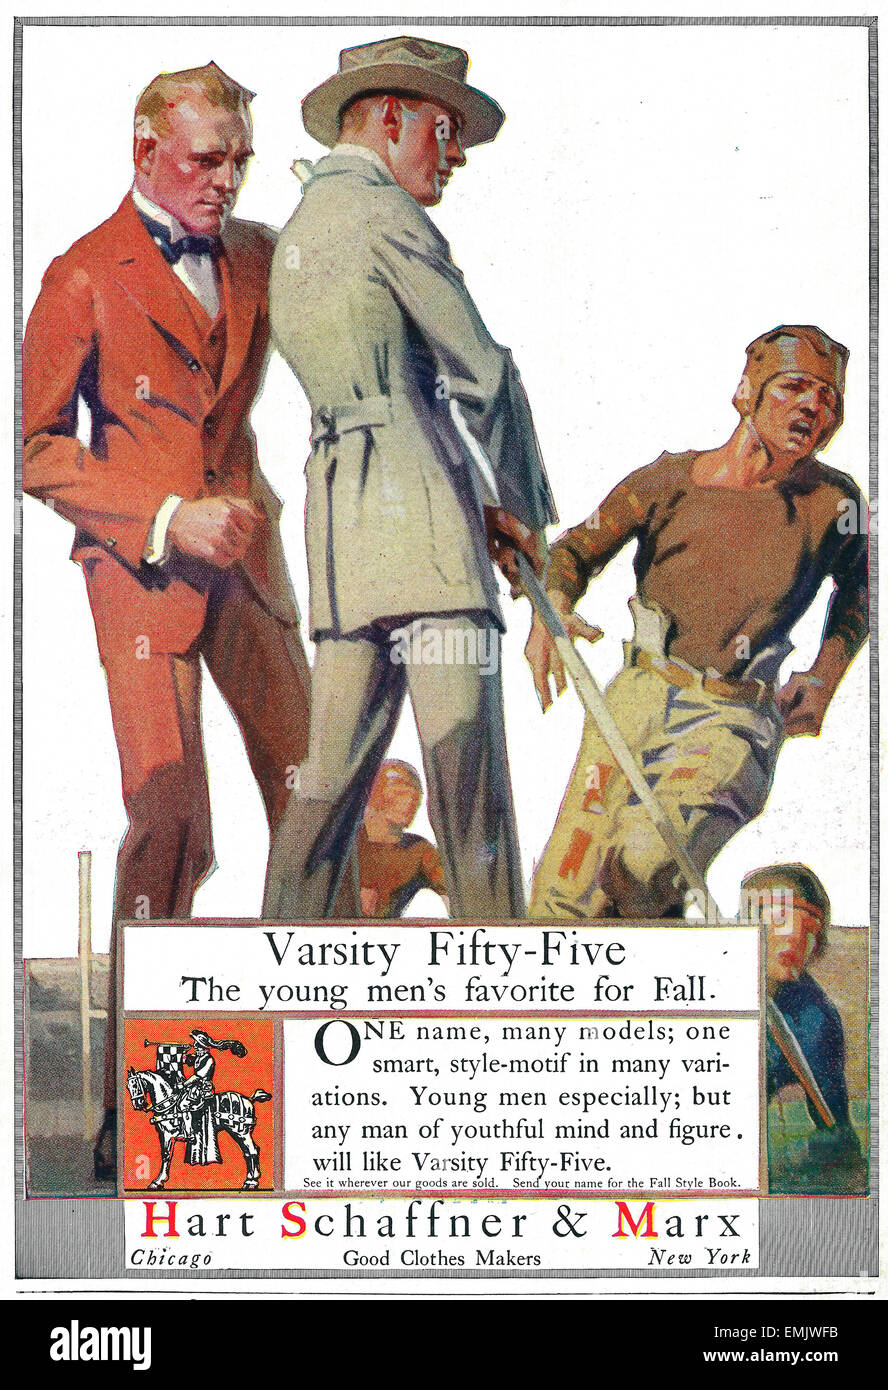 Varsity Fifty-Five - The young men's favorite for fall. Hart, Schaffner and Marx clothing advertisement, circa 1916 Stock Photo